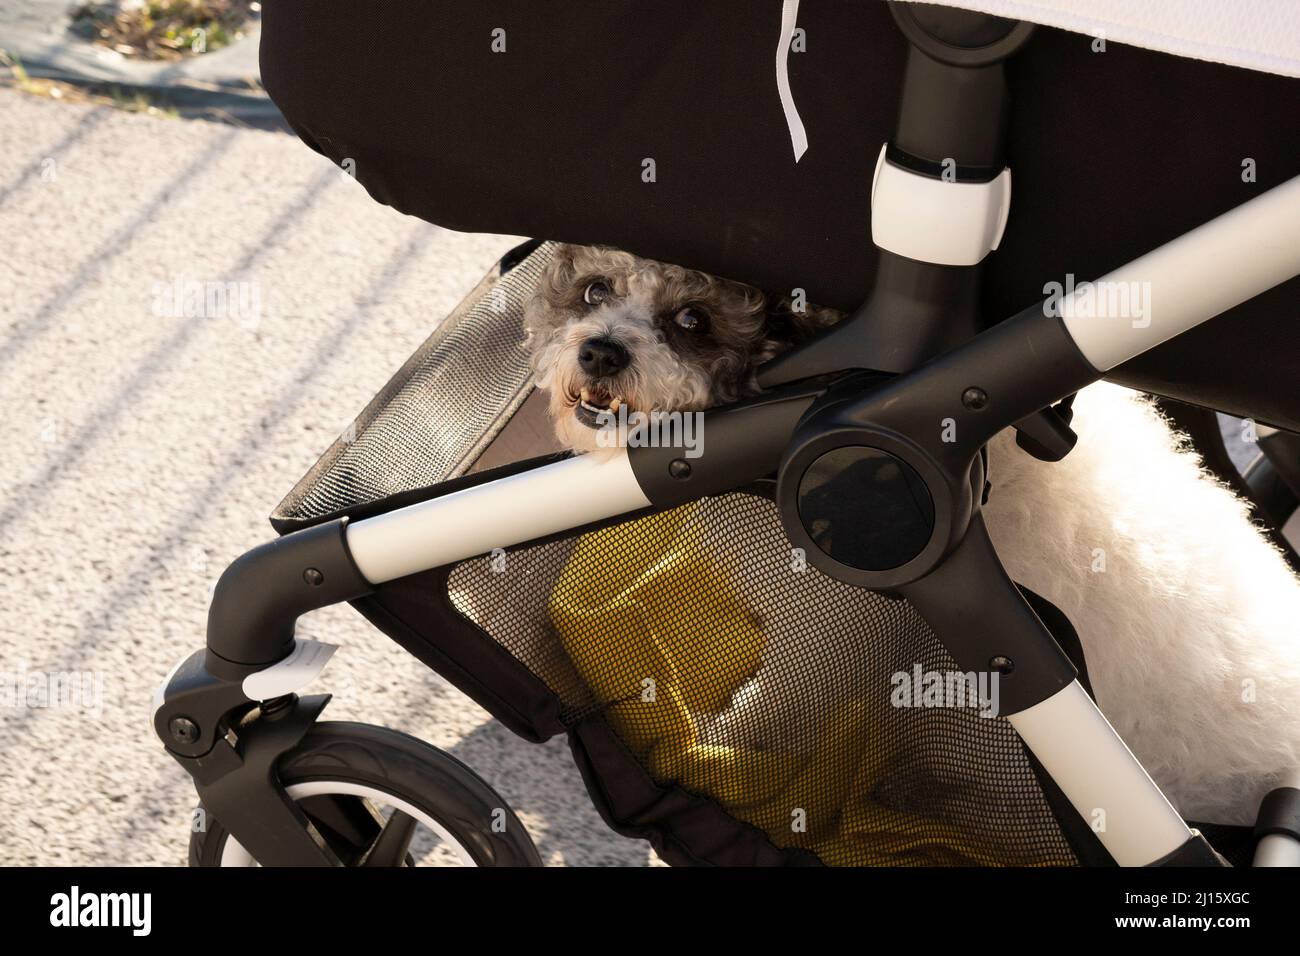 dog sitting in the basket of a newborn stroller Stock Photo